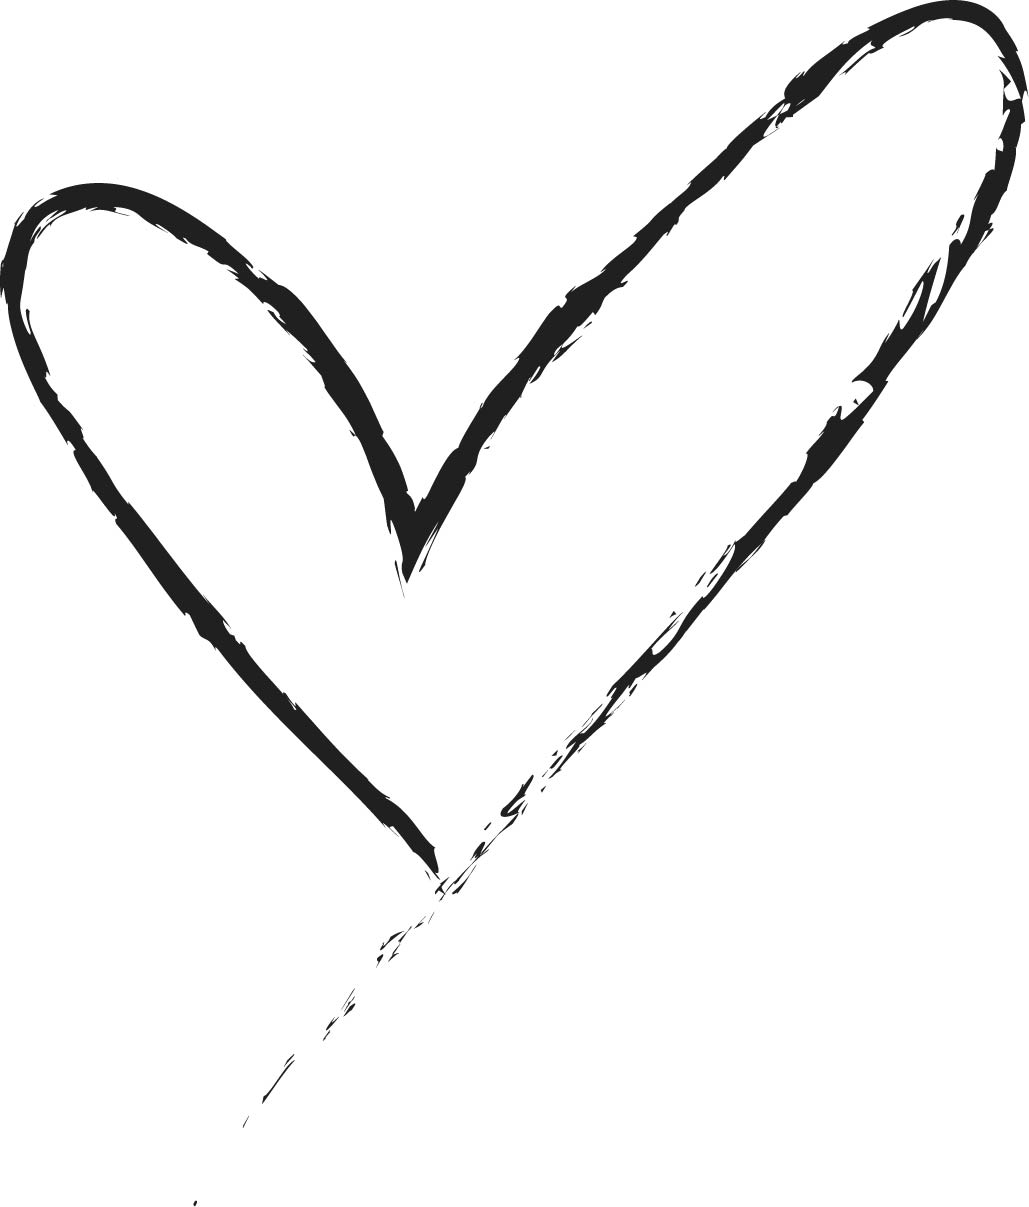 Drawn love heart in black on white background